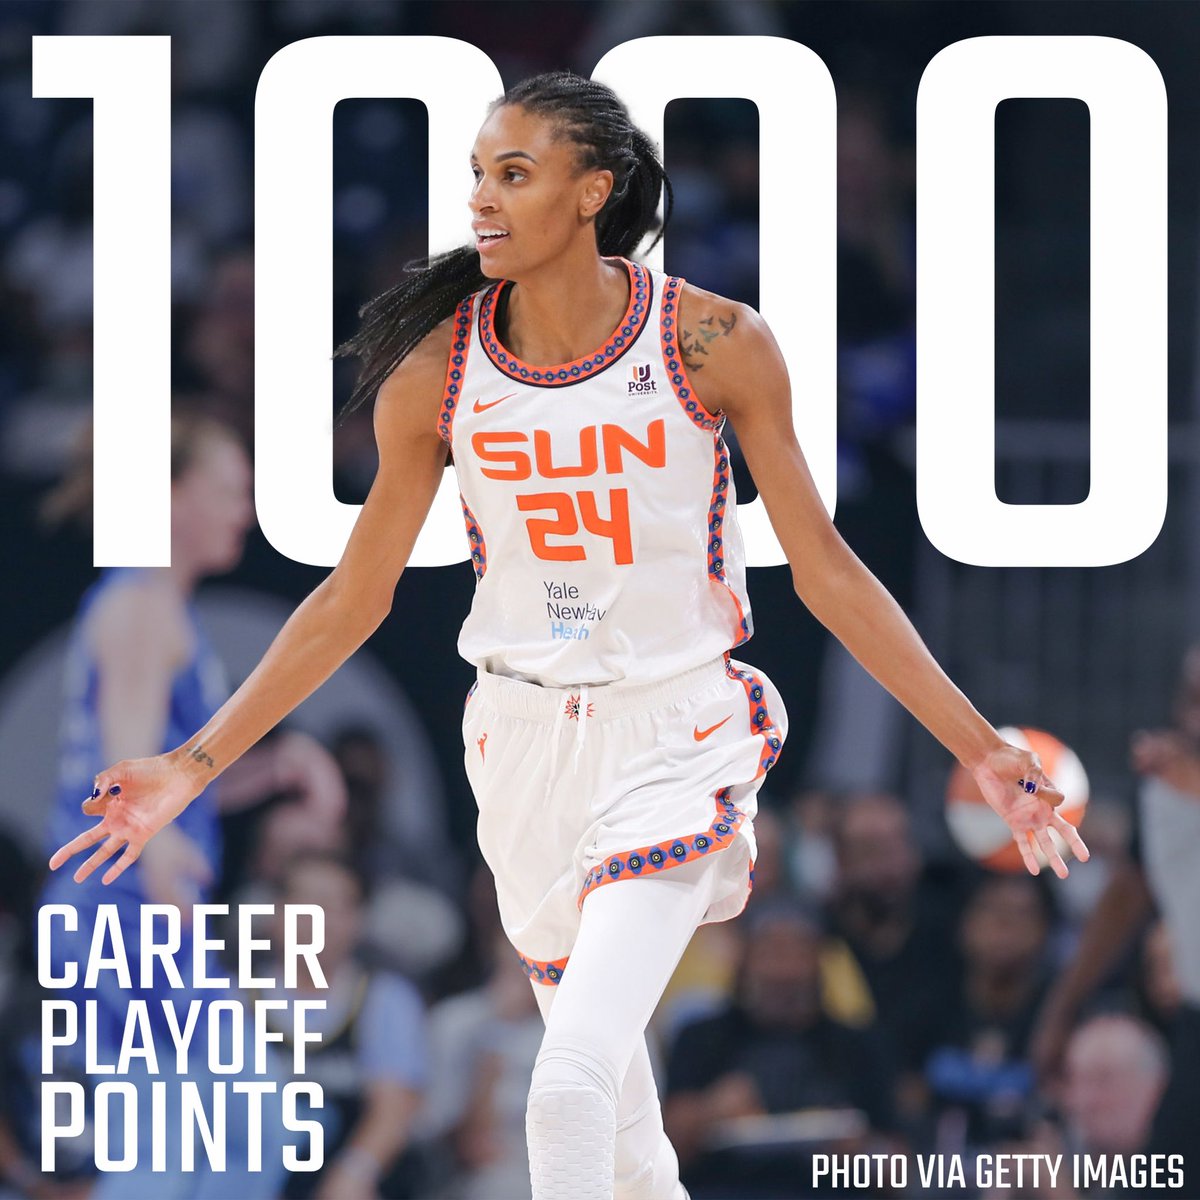 Congratulations to the GOAT DeWanna Bonner on scoring her 1000th career playoff point! She joins only Tamika Catchings and Candace Parker in the 1000-point, 500-rebound playoff club🔥

#Auburn #WarEagle #SEC #AuburnBasketball #WomensHoops